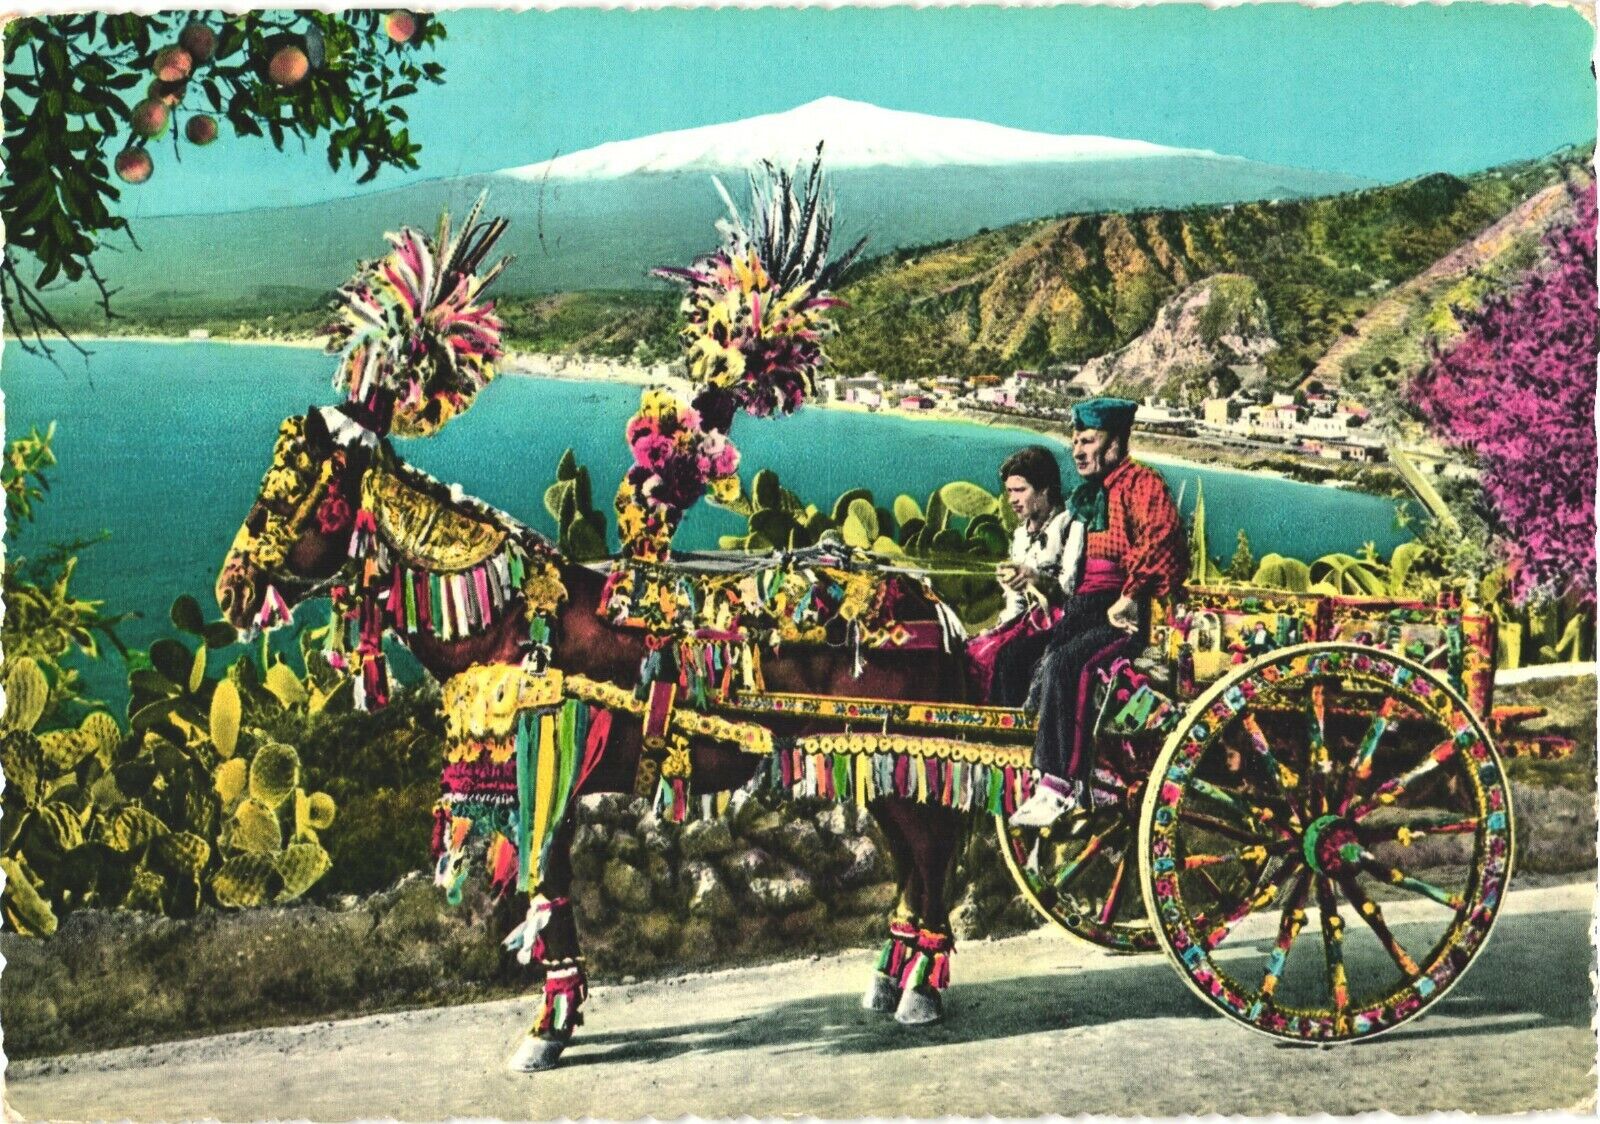 Man And Woman Riding A Very Colorful Sicilian Cart, Sicily, Italy Postcard